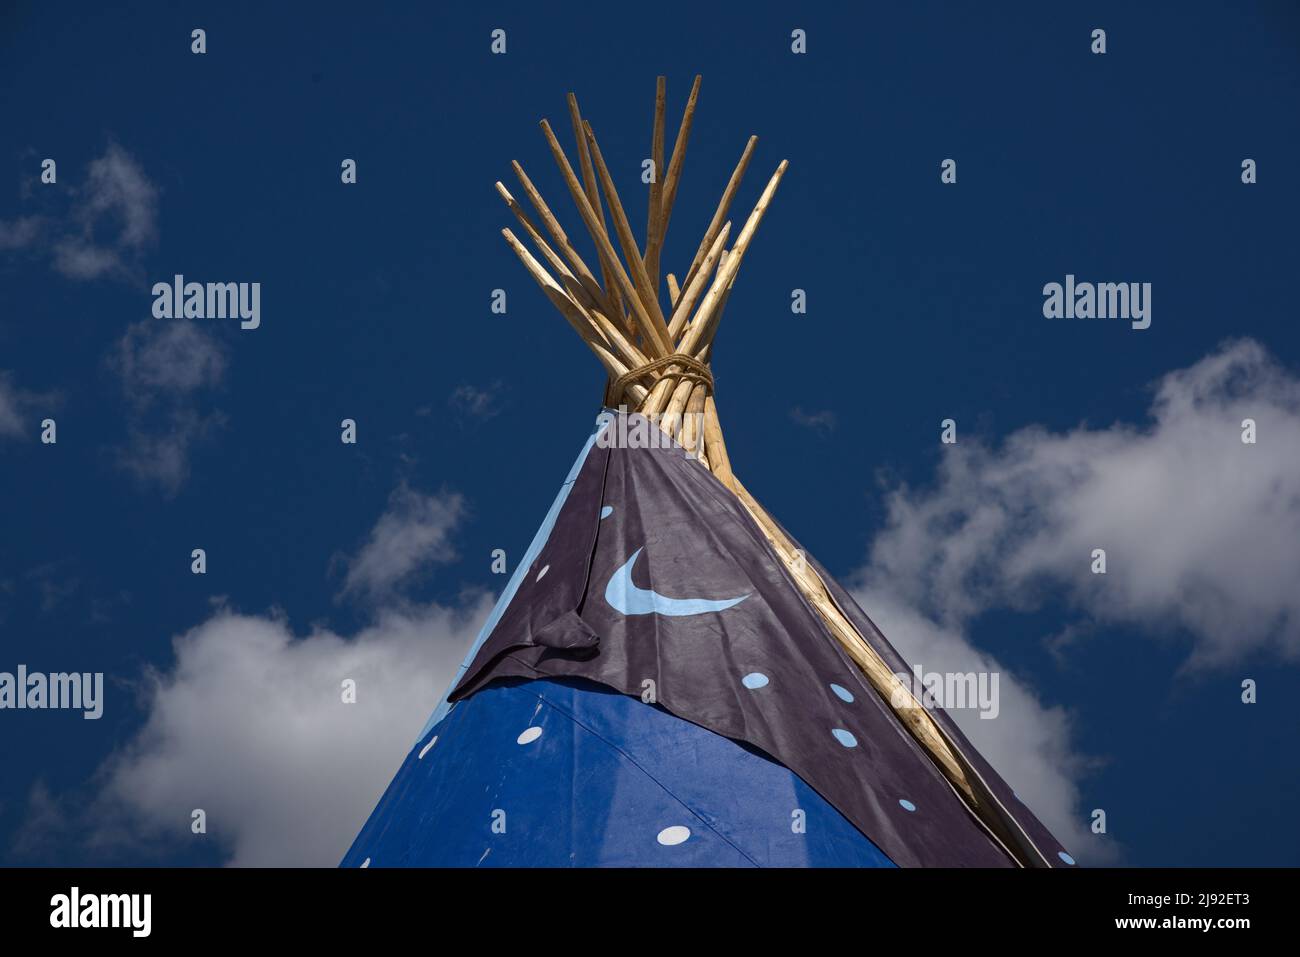 American Indian teepee poles of 24 foot structure against a blue sky with decorative canvas. Stock Photo